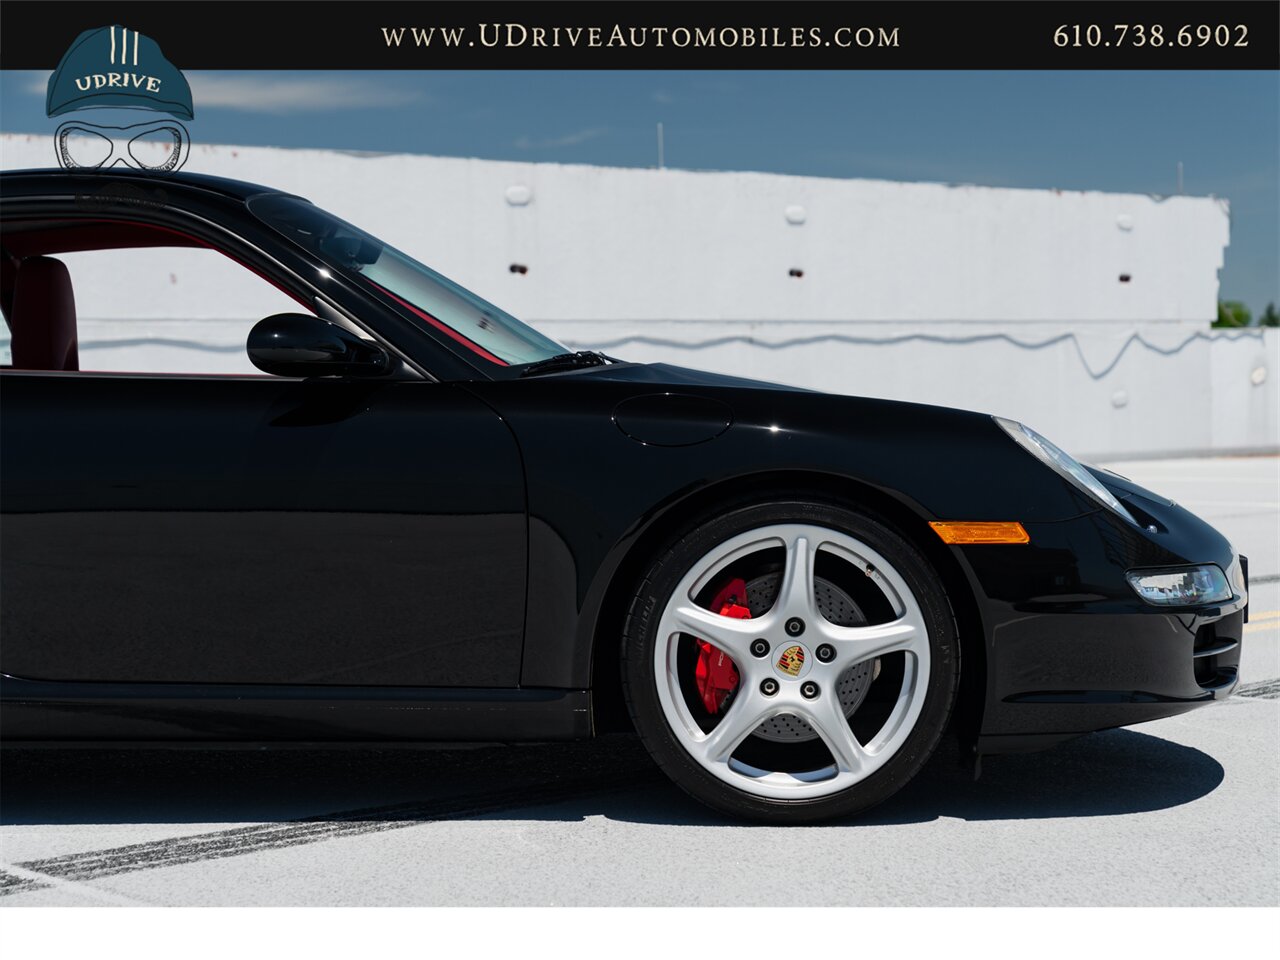 2005 Porsche 911 Carrera 911S 997 6 Speed 13k Miles Chrono  Leather to Sample Boxster Red/Blk Service History - Photo 16 - West Chester, PA 19382